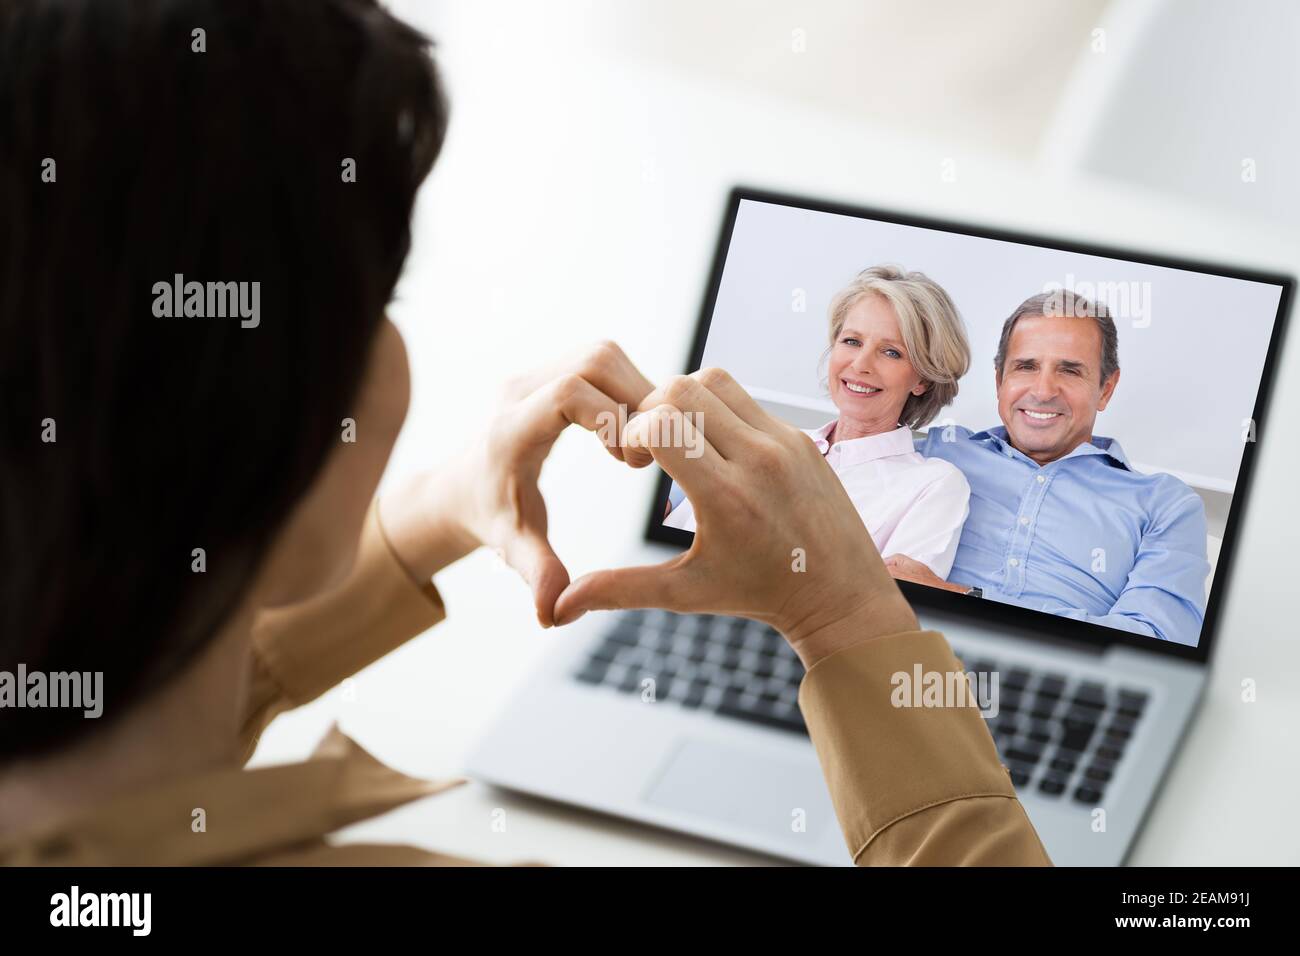 Video Conference Call With Parents On Laptop Stock Photo